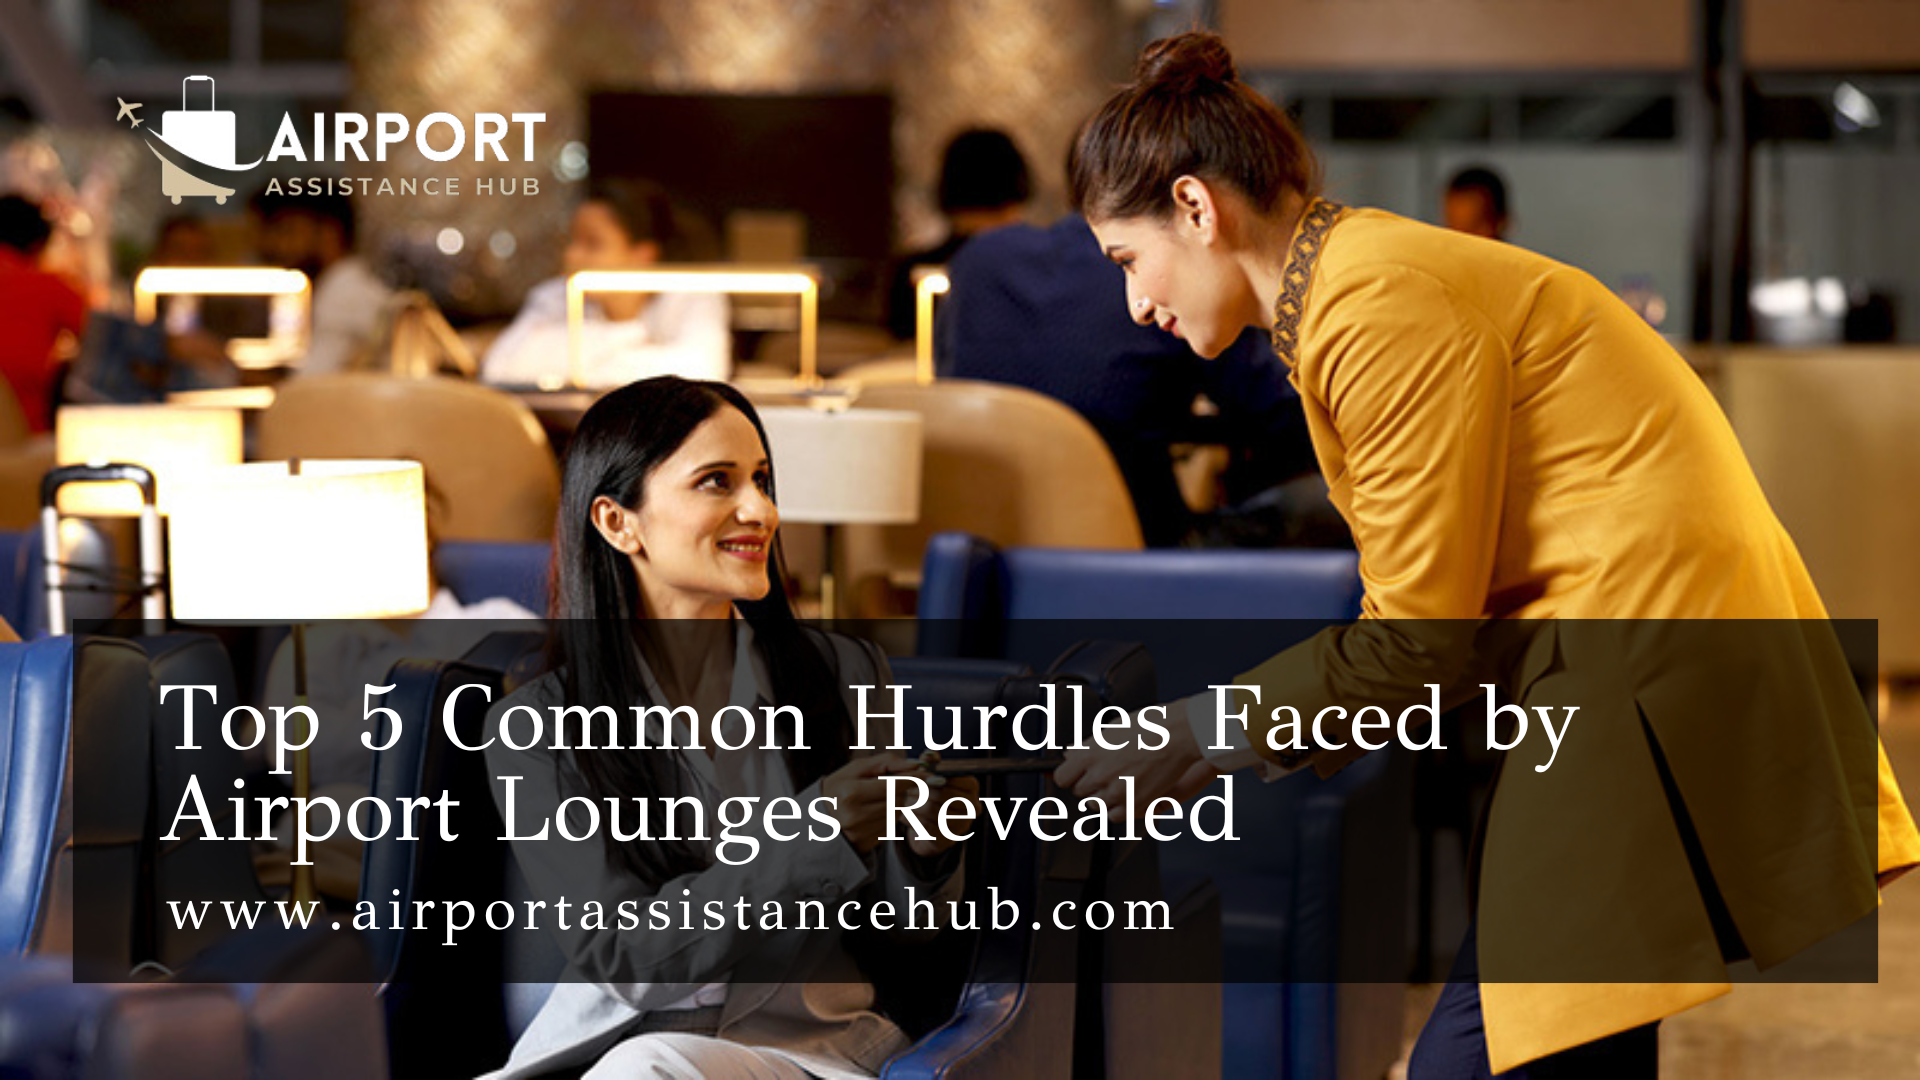 Top 5 Common Hurdles Faced by Airport Lounges Revealed